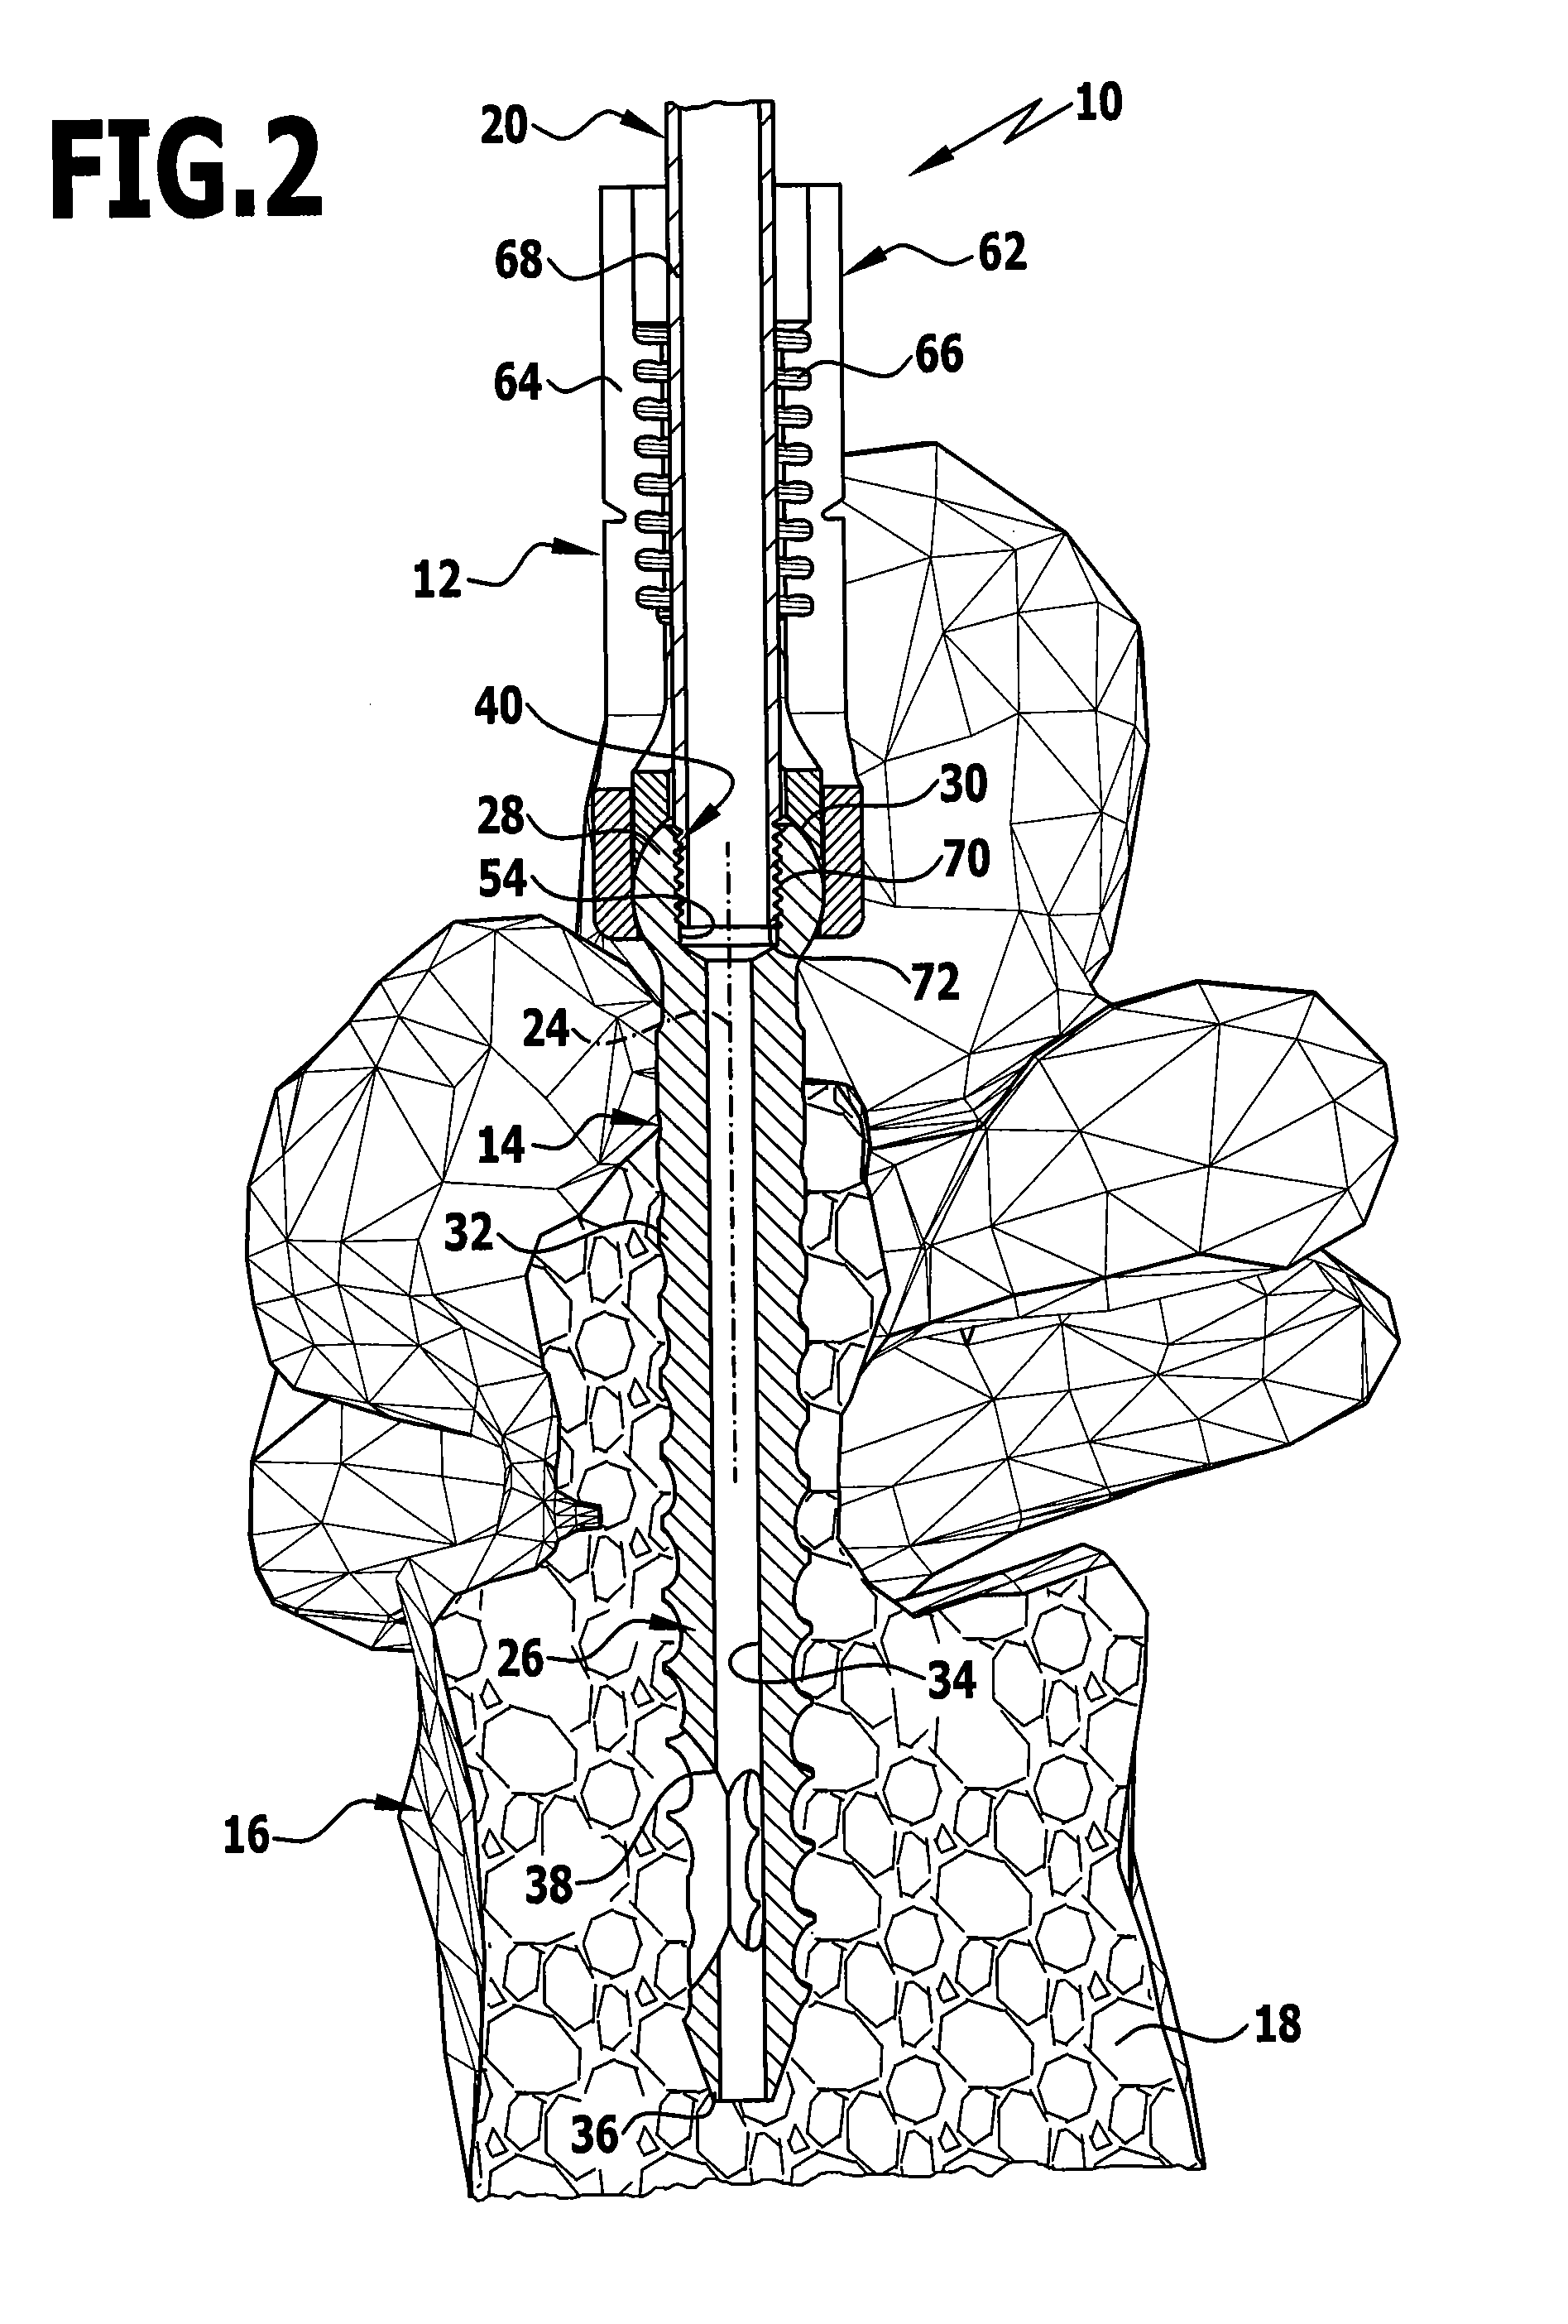 Implant and implantation system